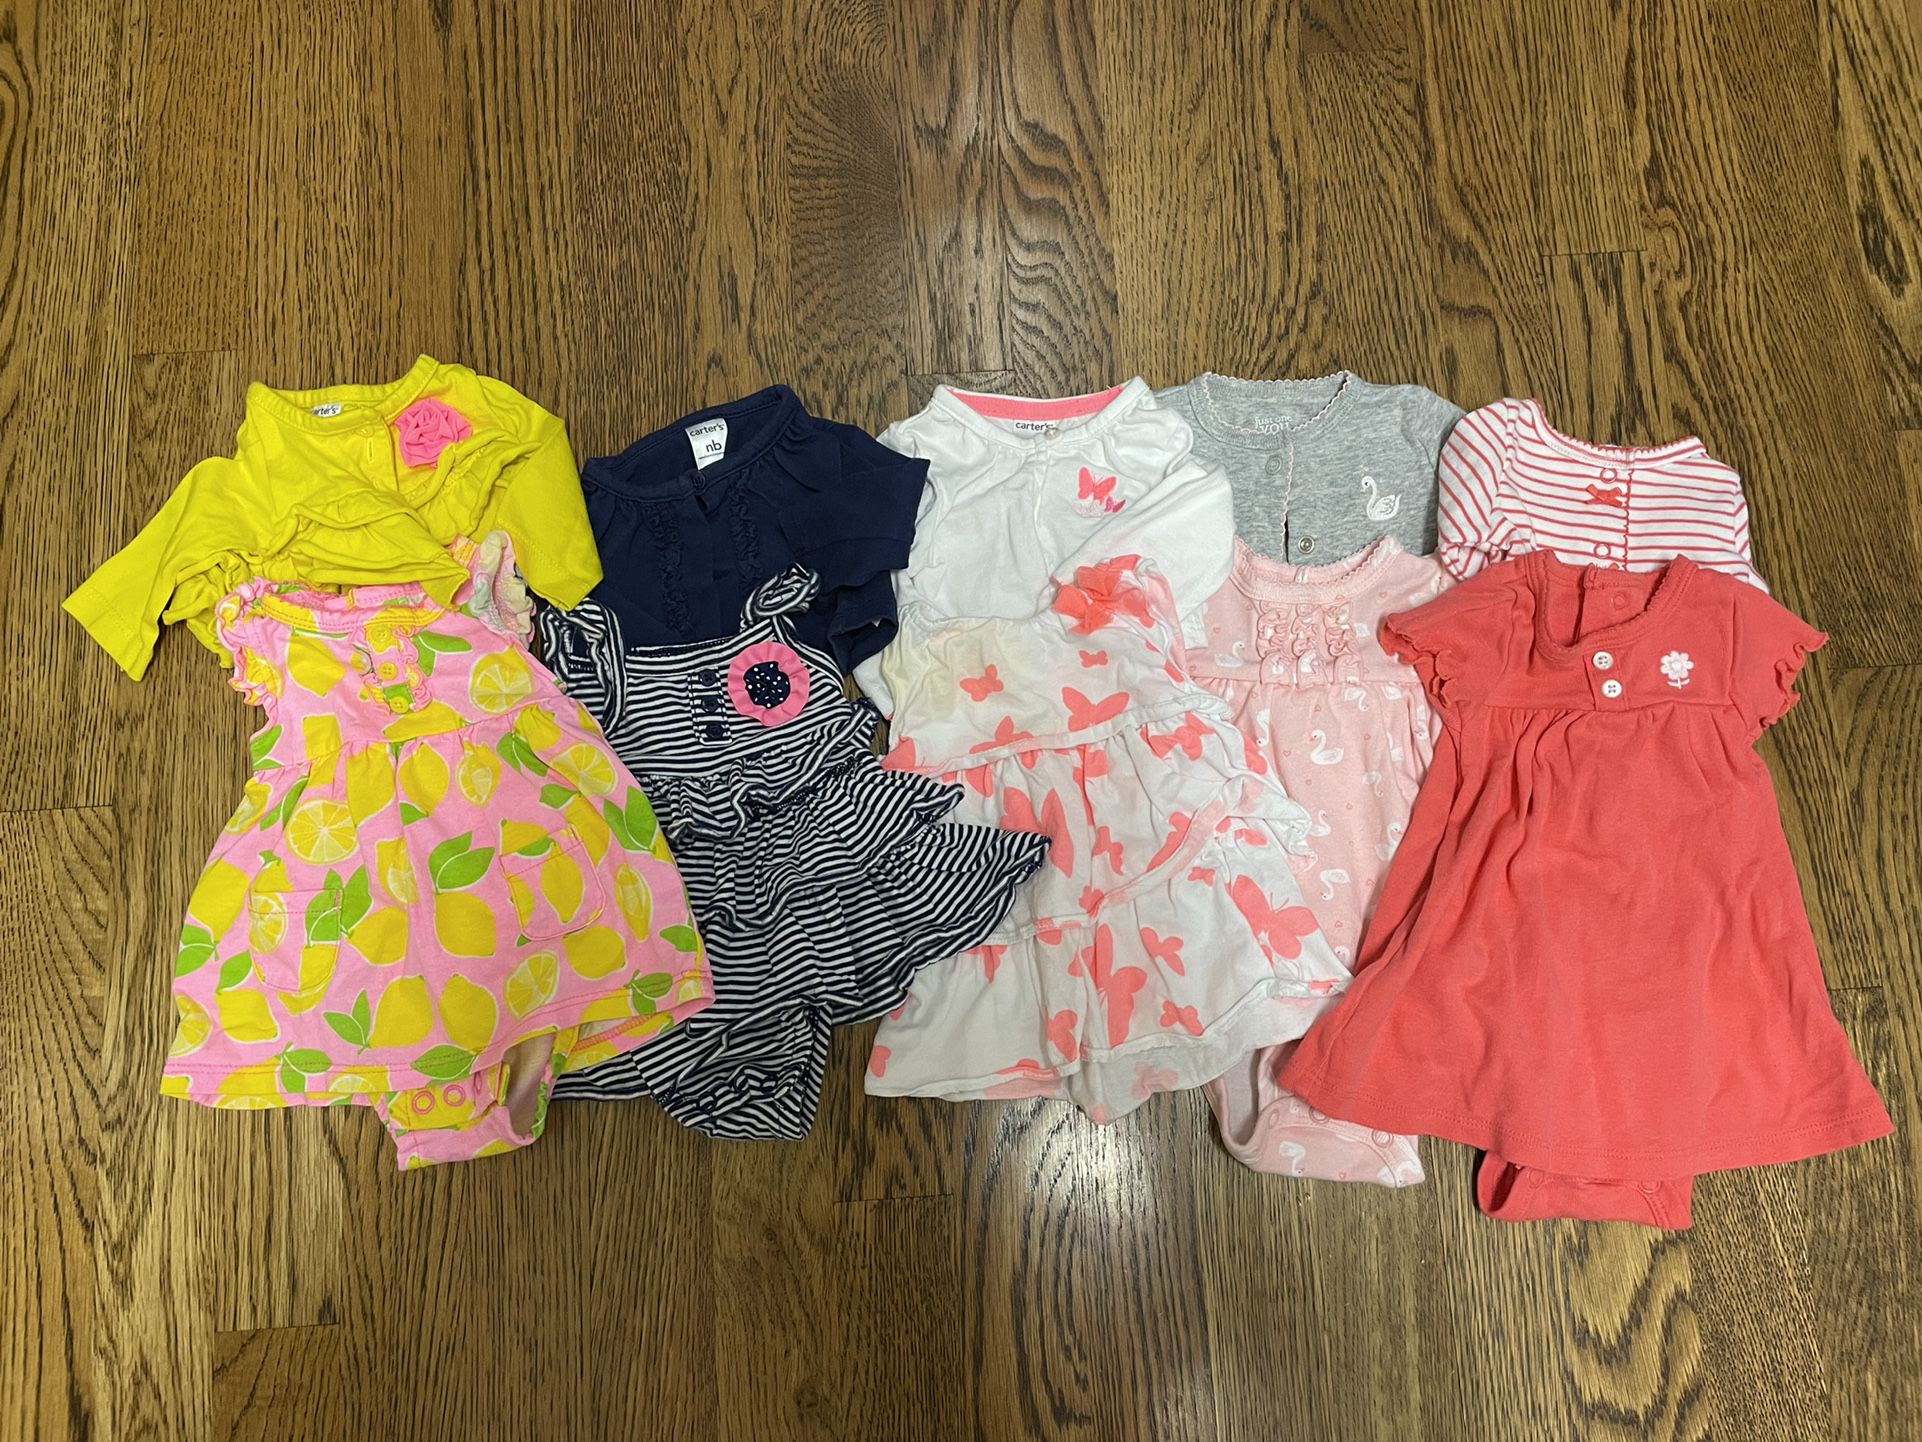 Carters New Baby Girl Dresses With Cardigans (5)